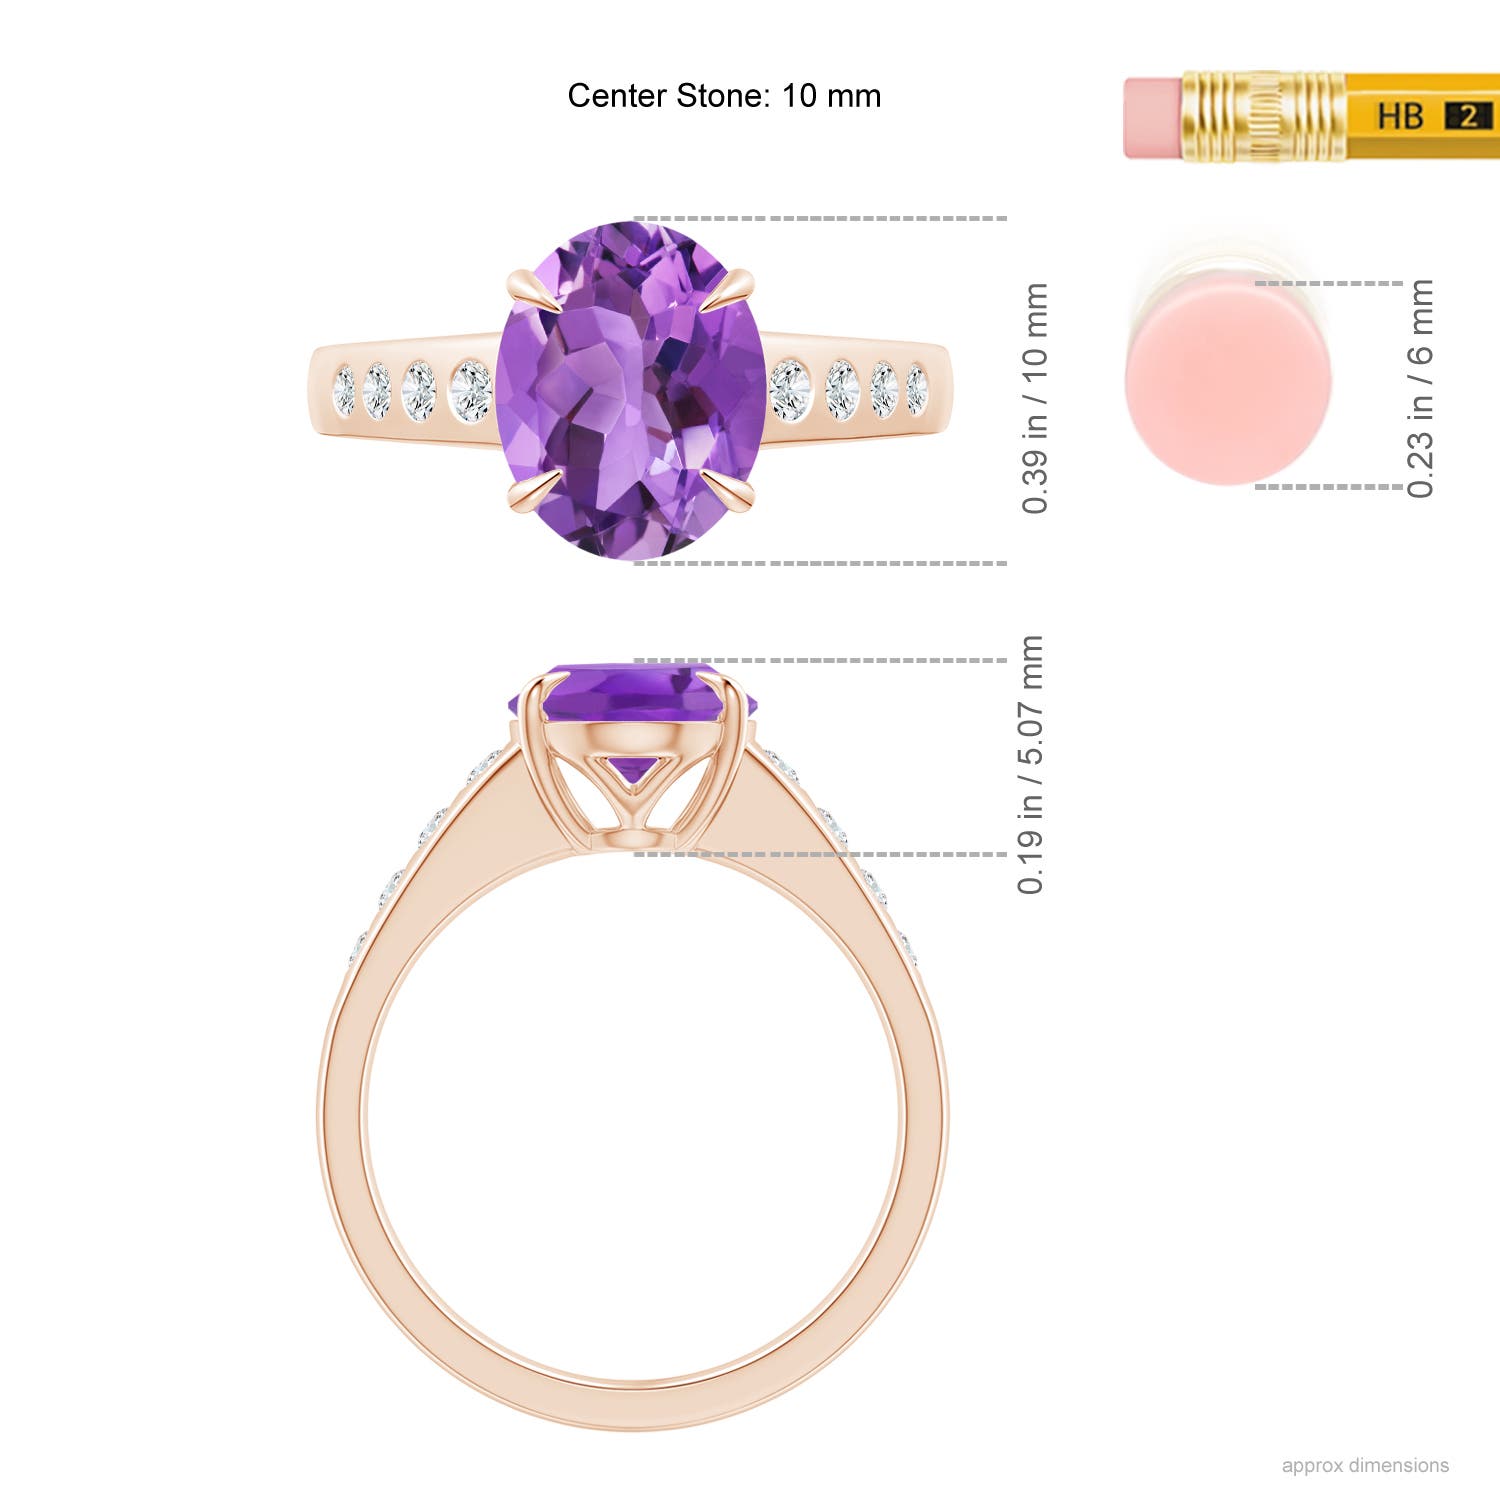 AA - Amethyst / 2.5 CT / 14 KT Rose Gold